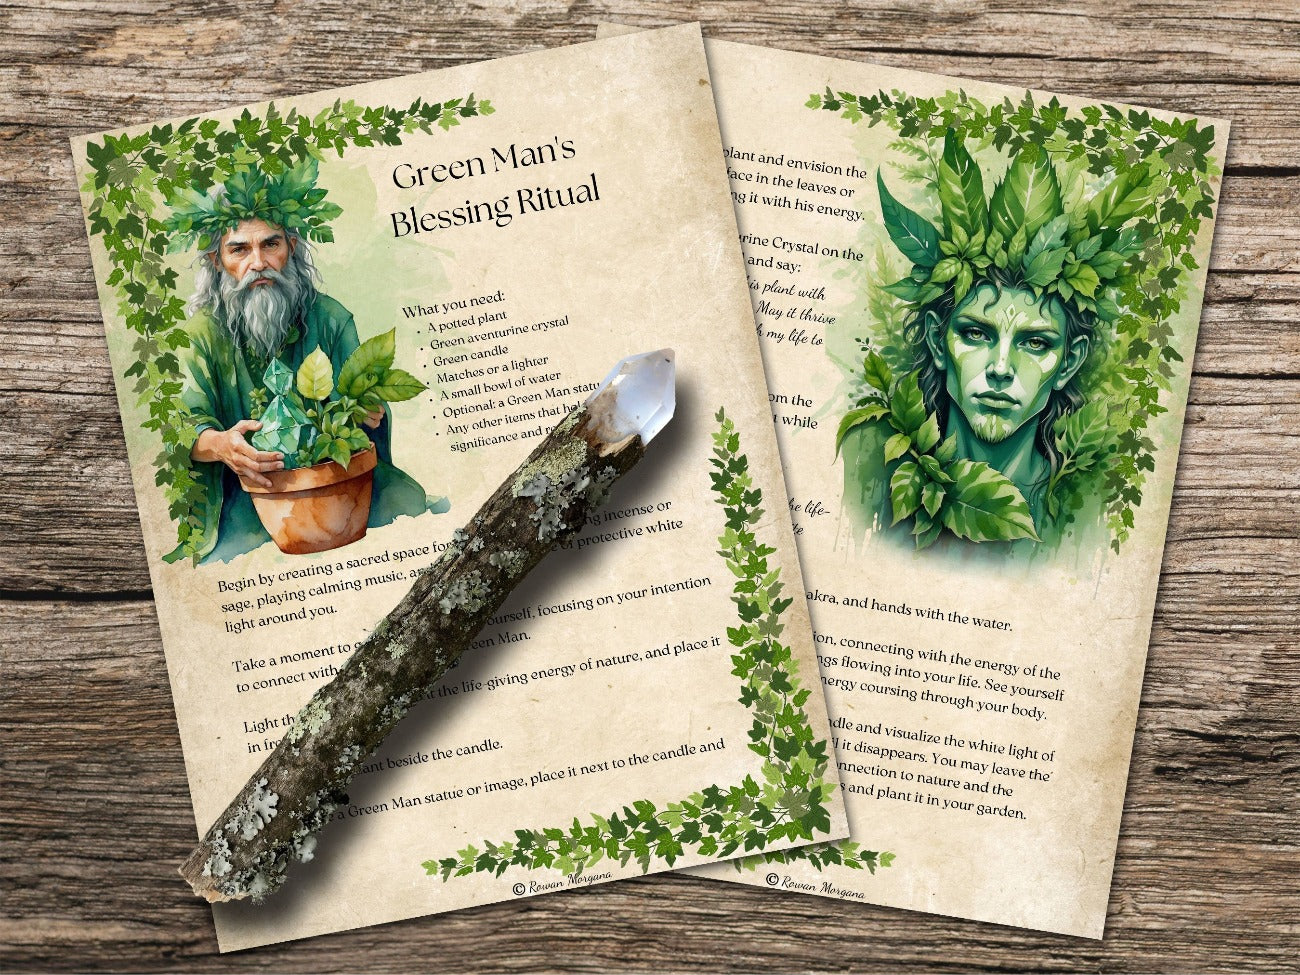 THE GREEN MAN, Parchment Background, Green Man Blessing Ritual, 2 pages with leafy green vine borders and fine art images of the Green Man - Morgana Magick Spell